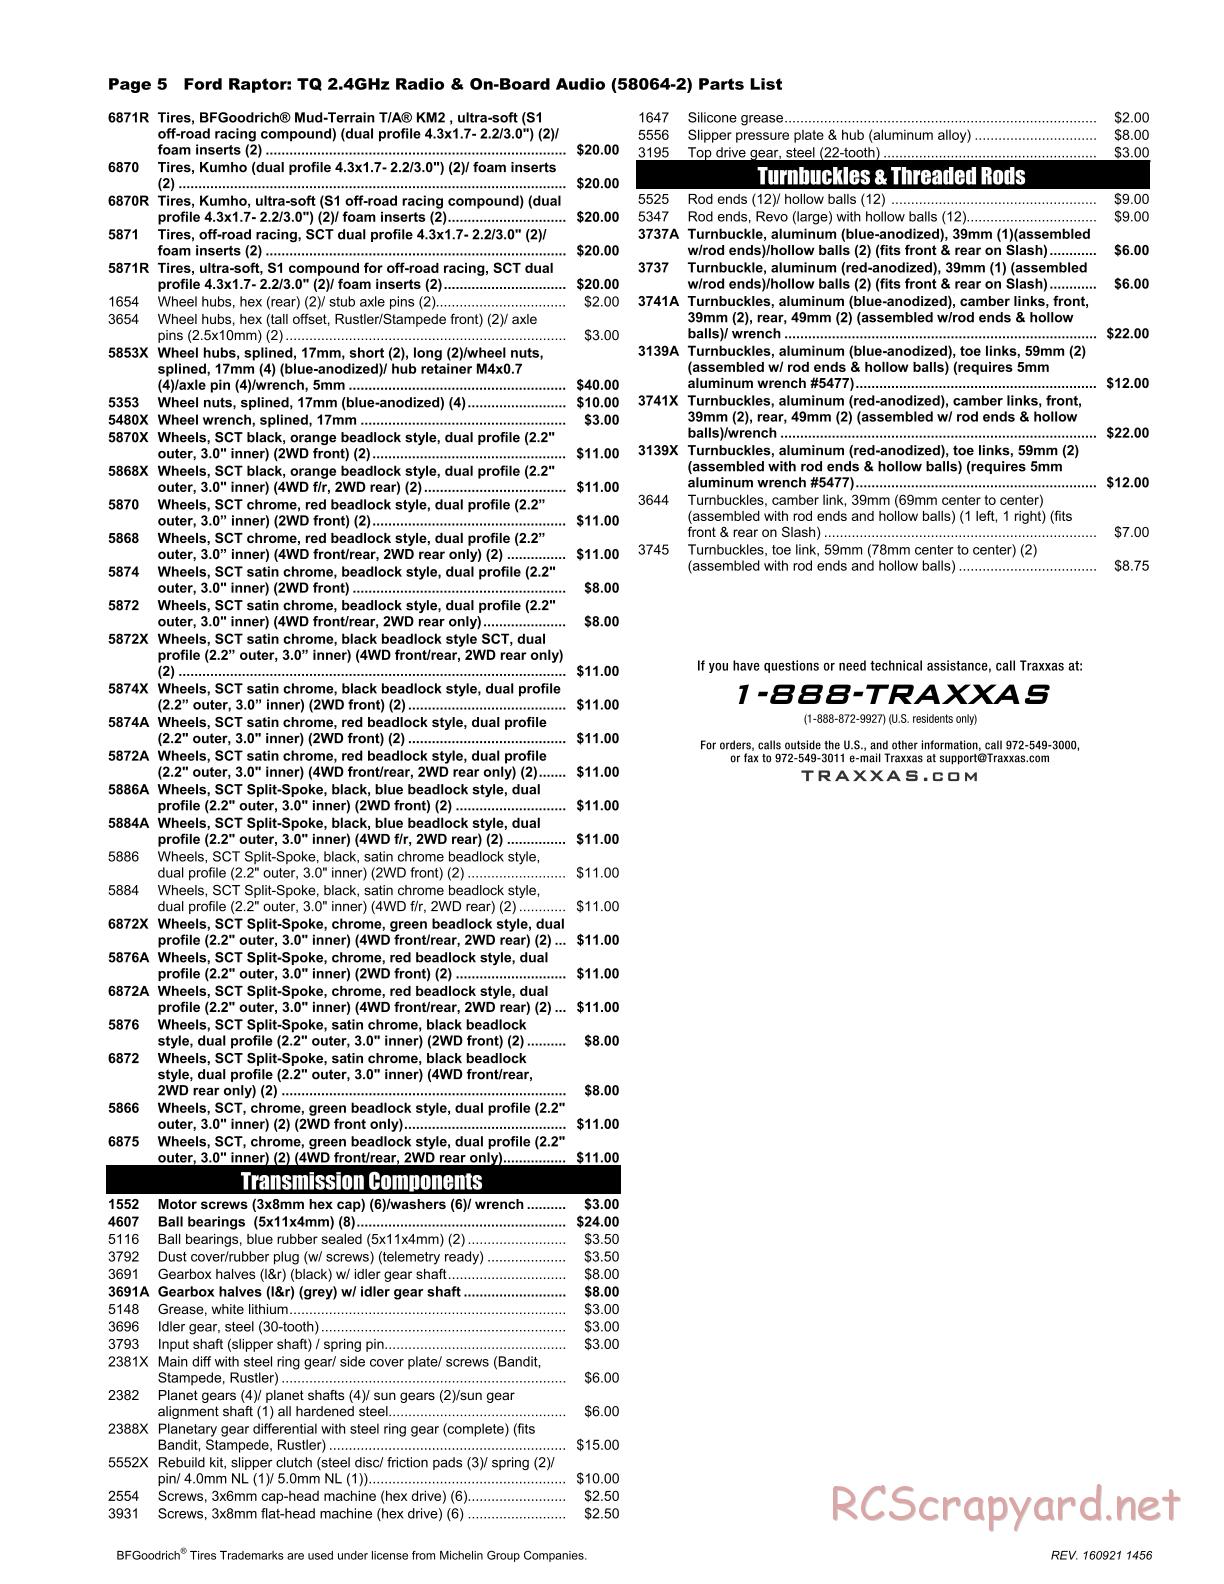 Traxxas - Ford F-150 SVT Raptor OBA (2015) - Parts List - Page 5